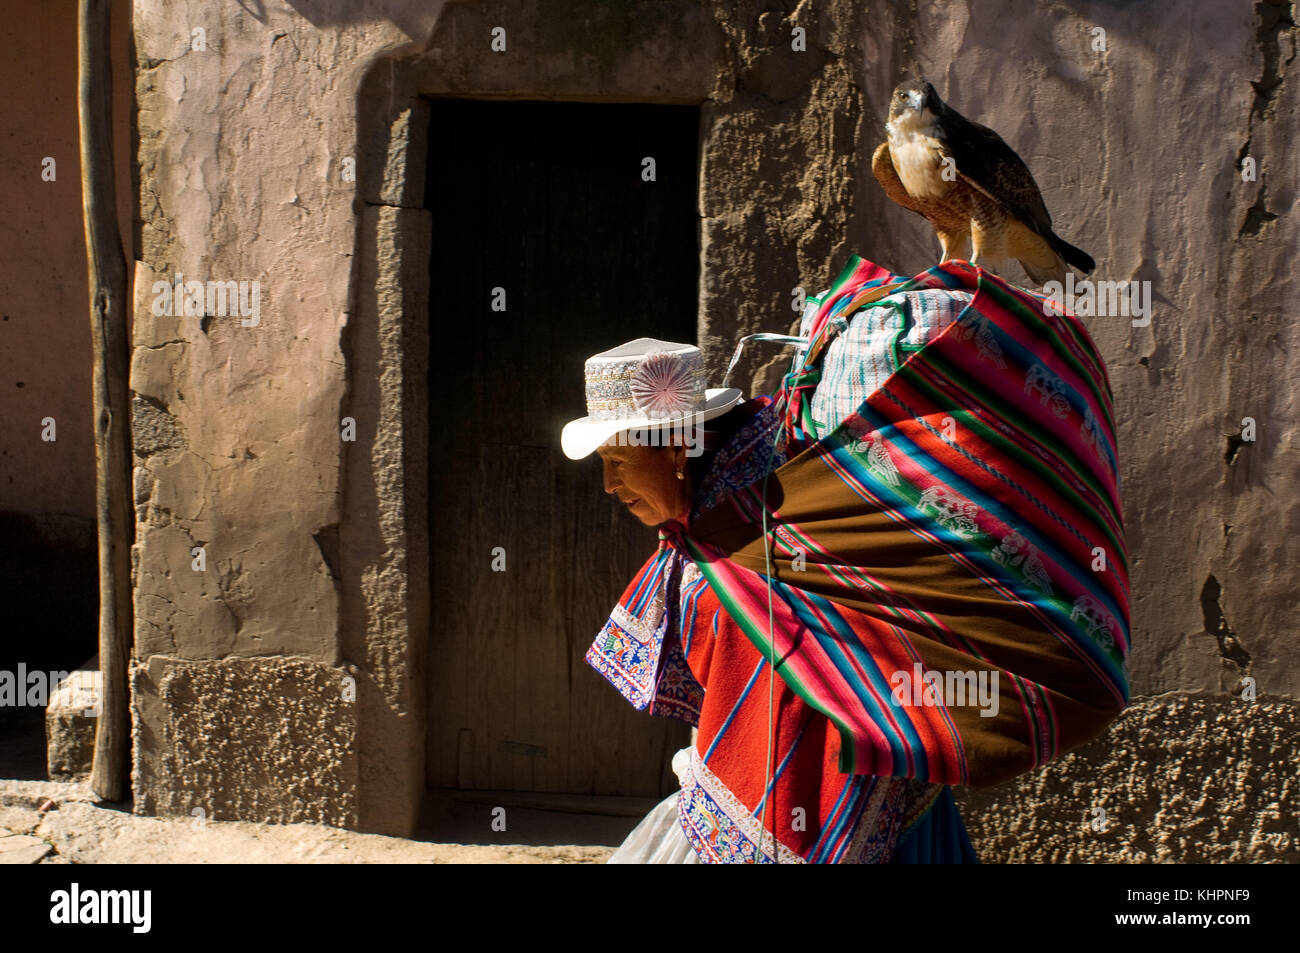 Yanke, one of the small towns in the Colca Valley where the vendors liven up the sale by photographing themselves with their eaglets, owls and llamas. Stock Photo